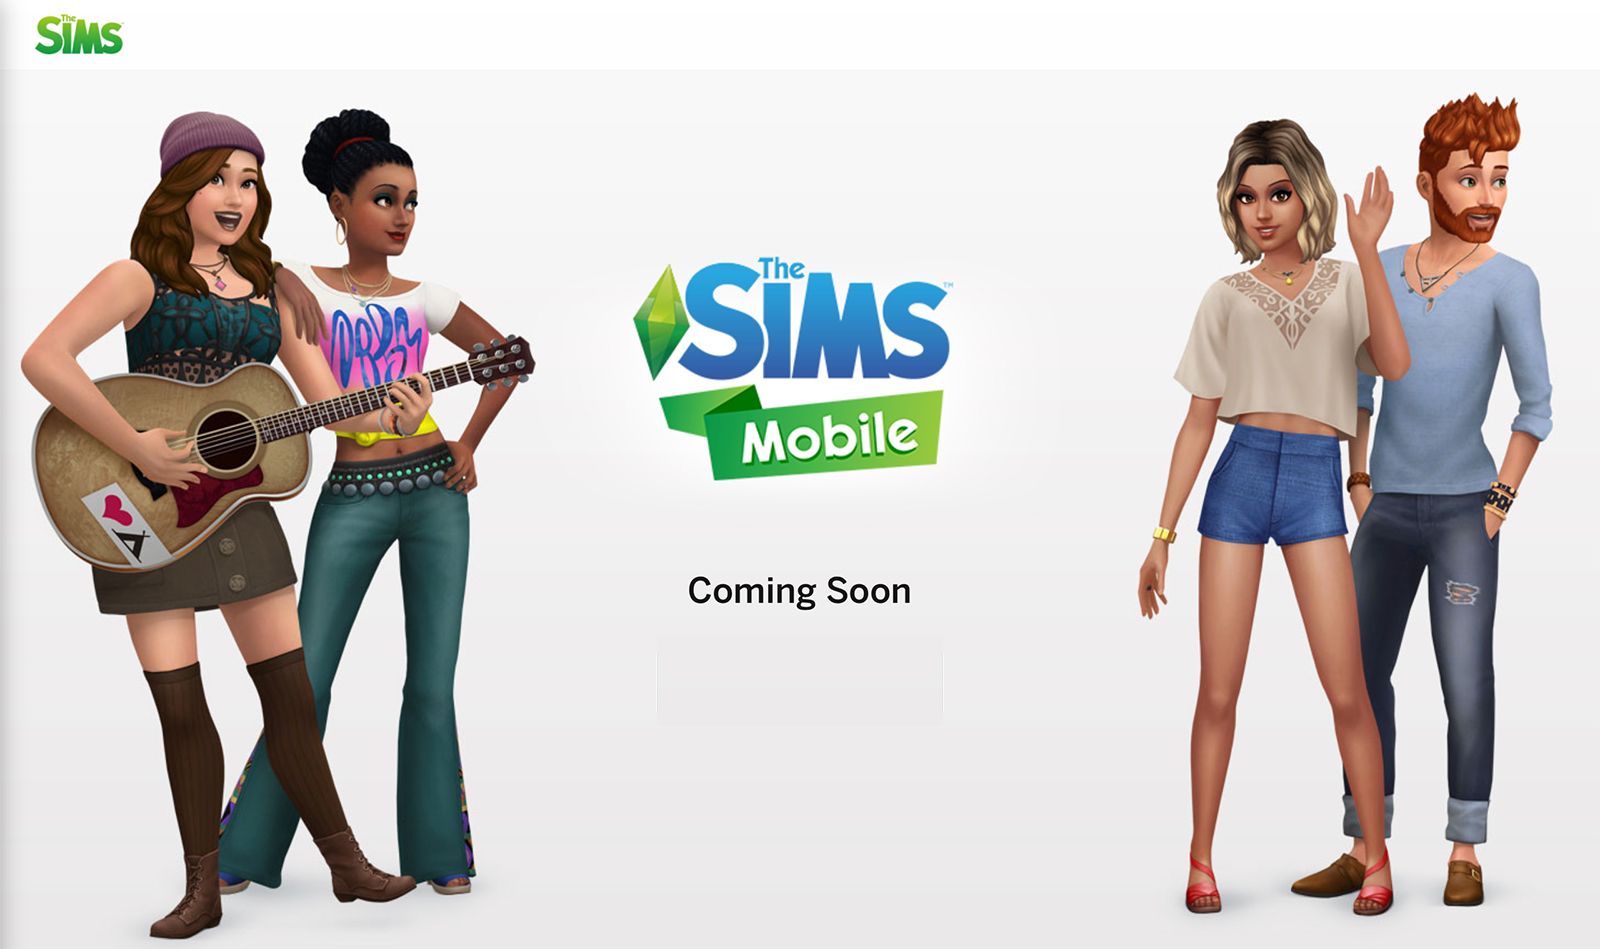 The Sims Mobile — Hello! I'm Alister.